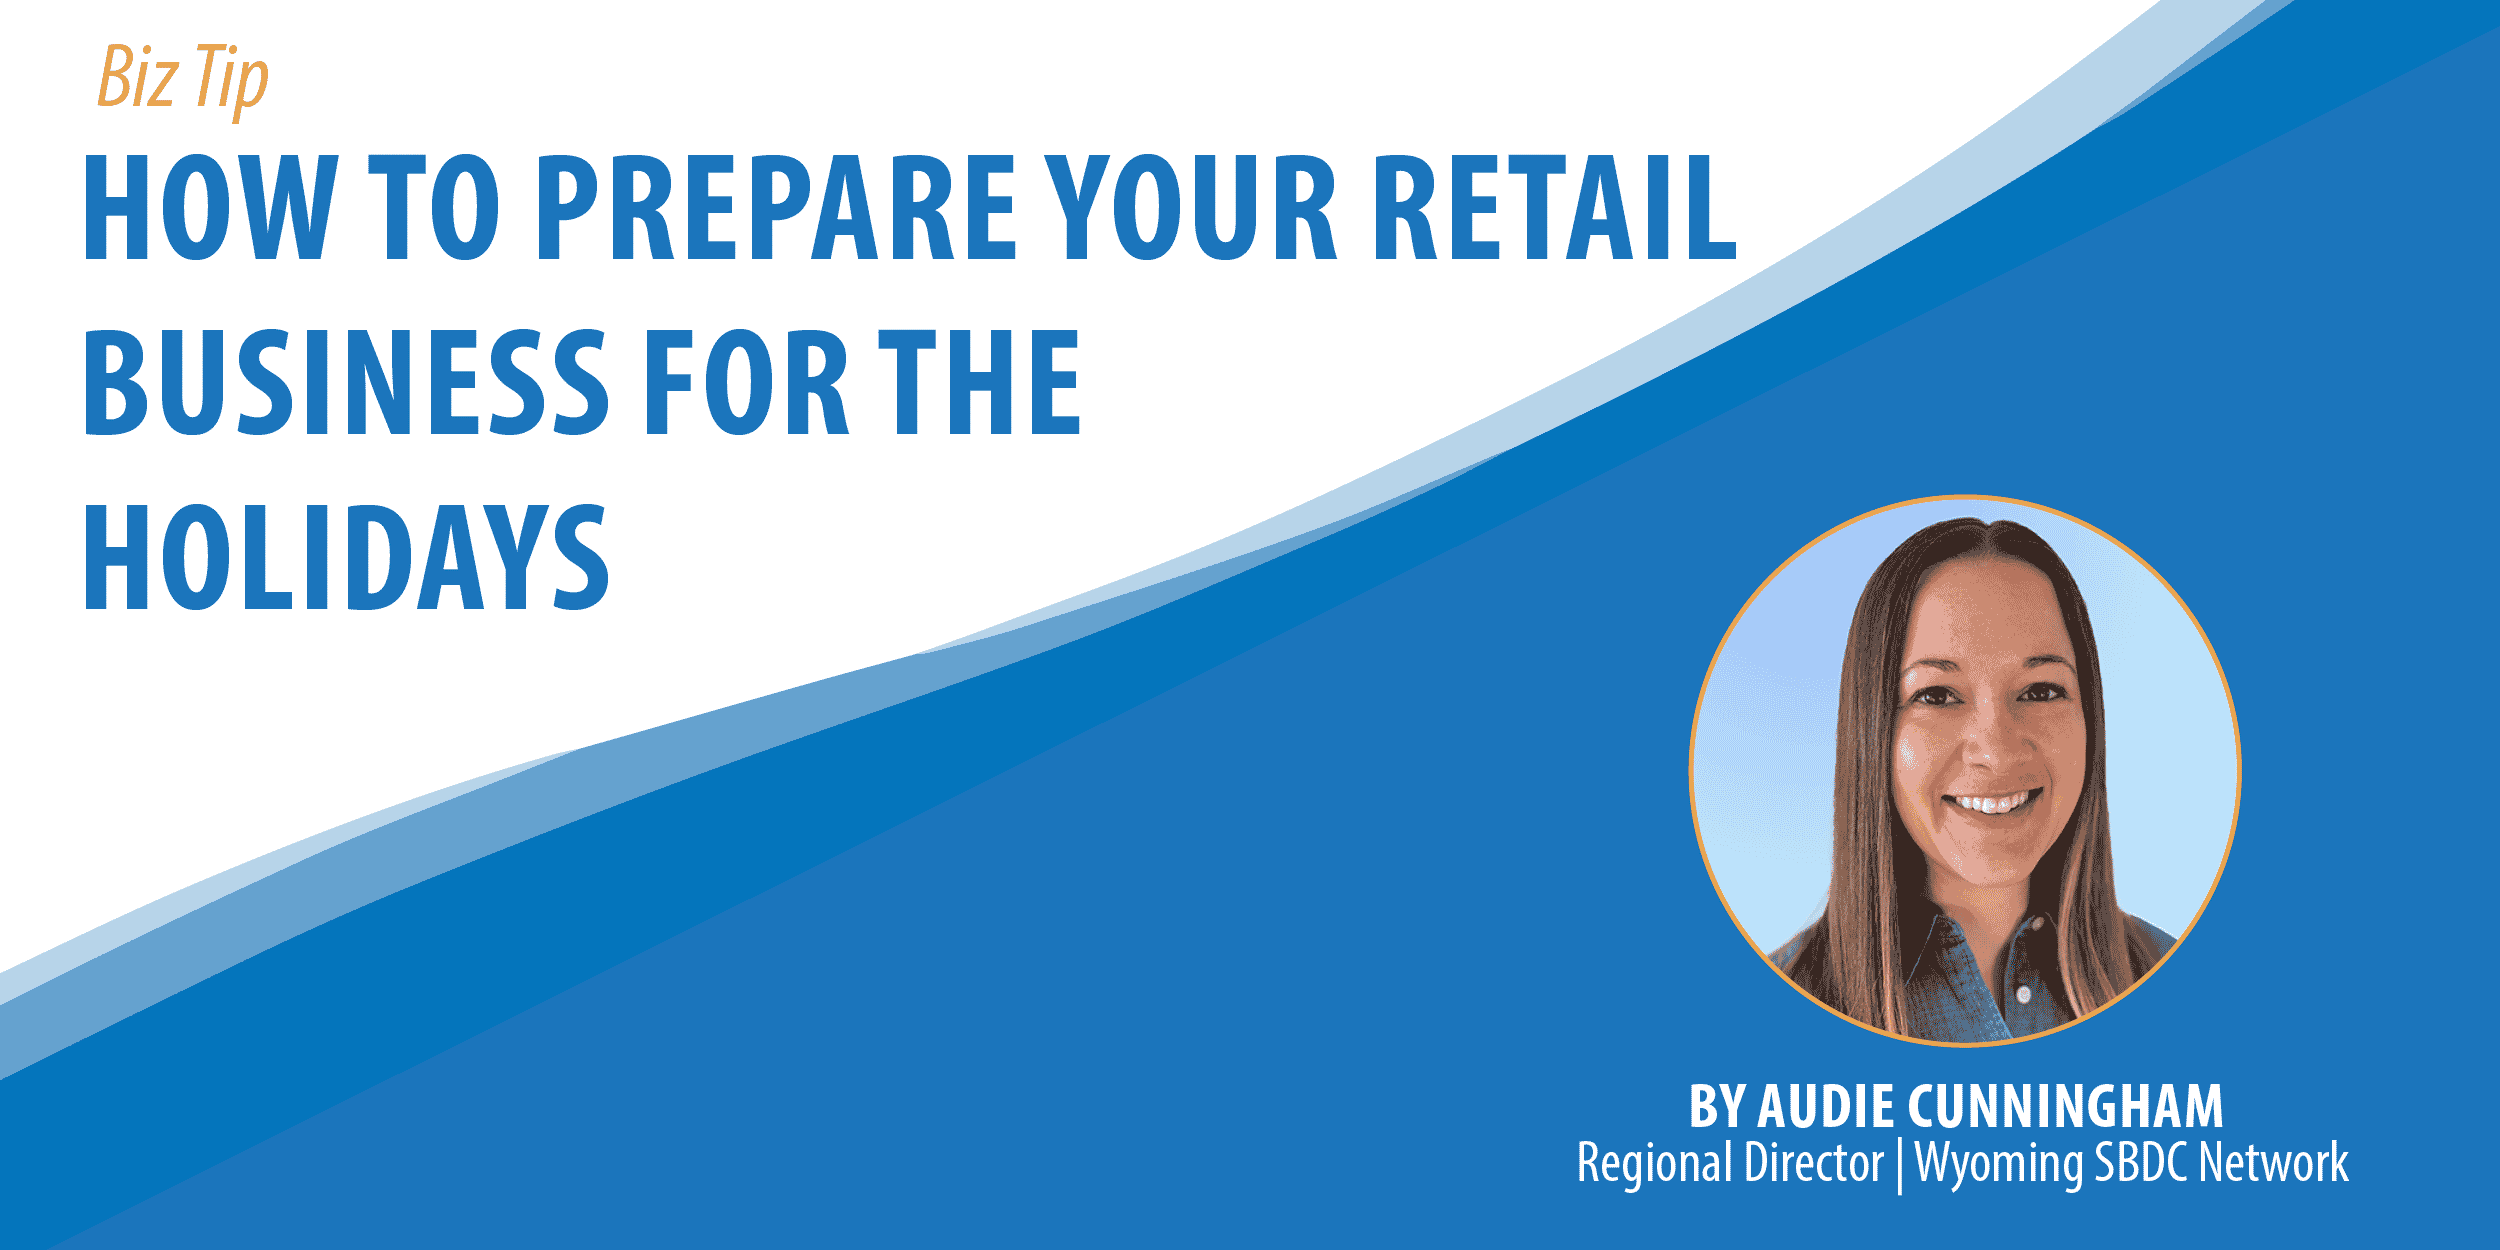 How to Prepare Your Retail Business for the Holidays